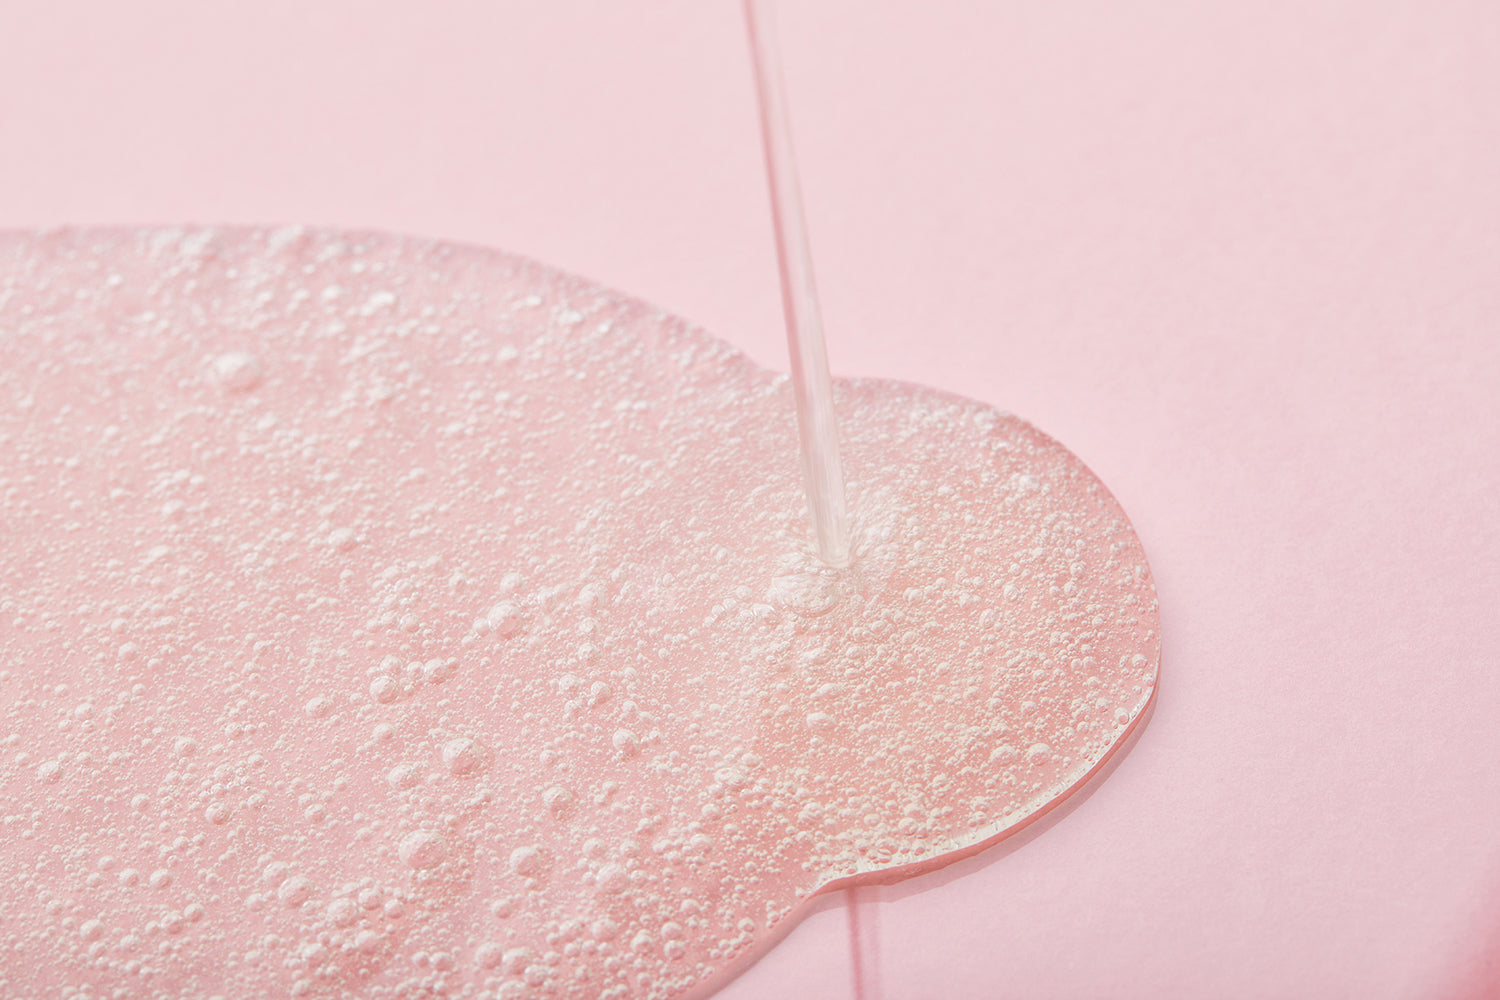 cleanser being poured on pink background